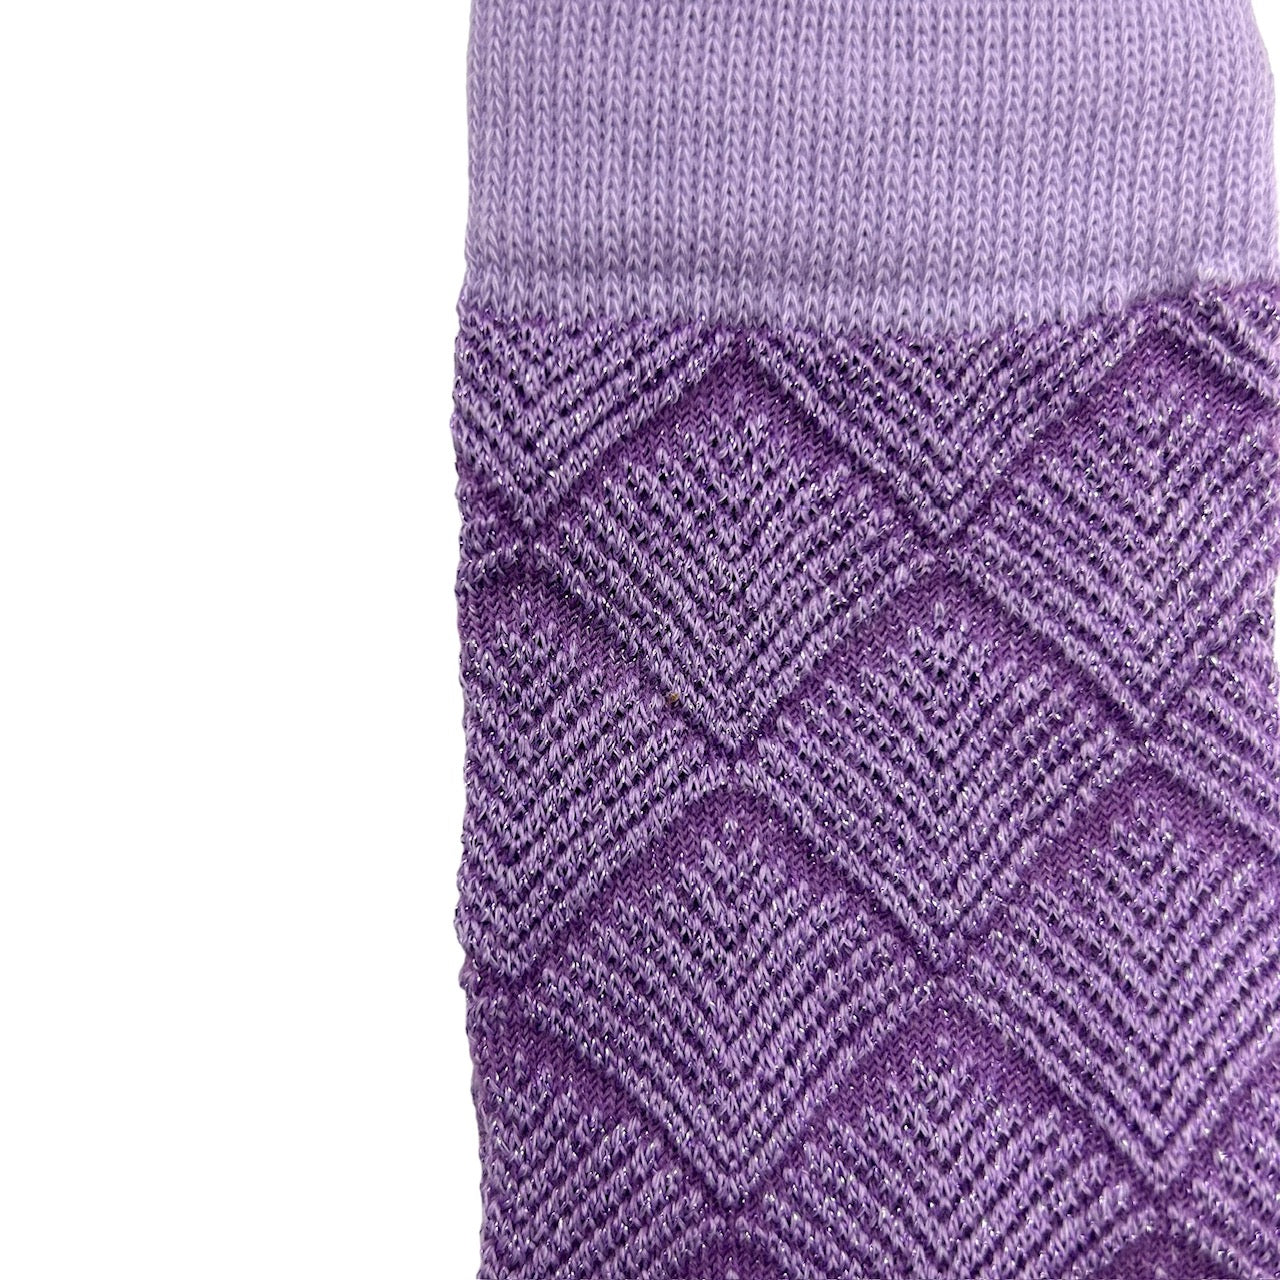 Paris socks in lilac with a pineapple brooch